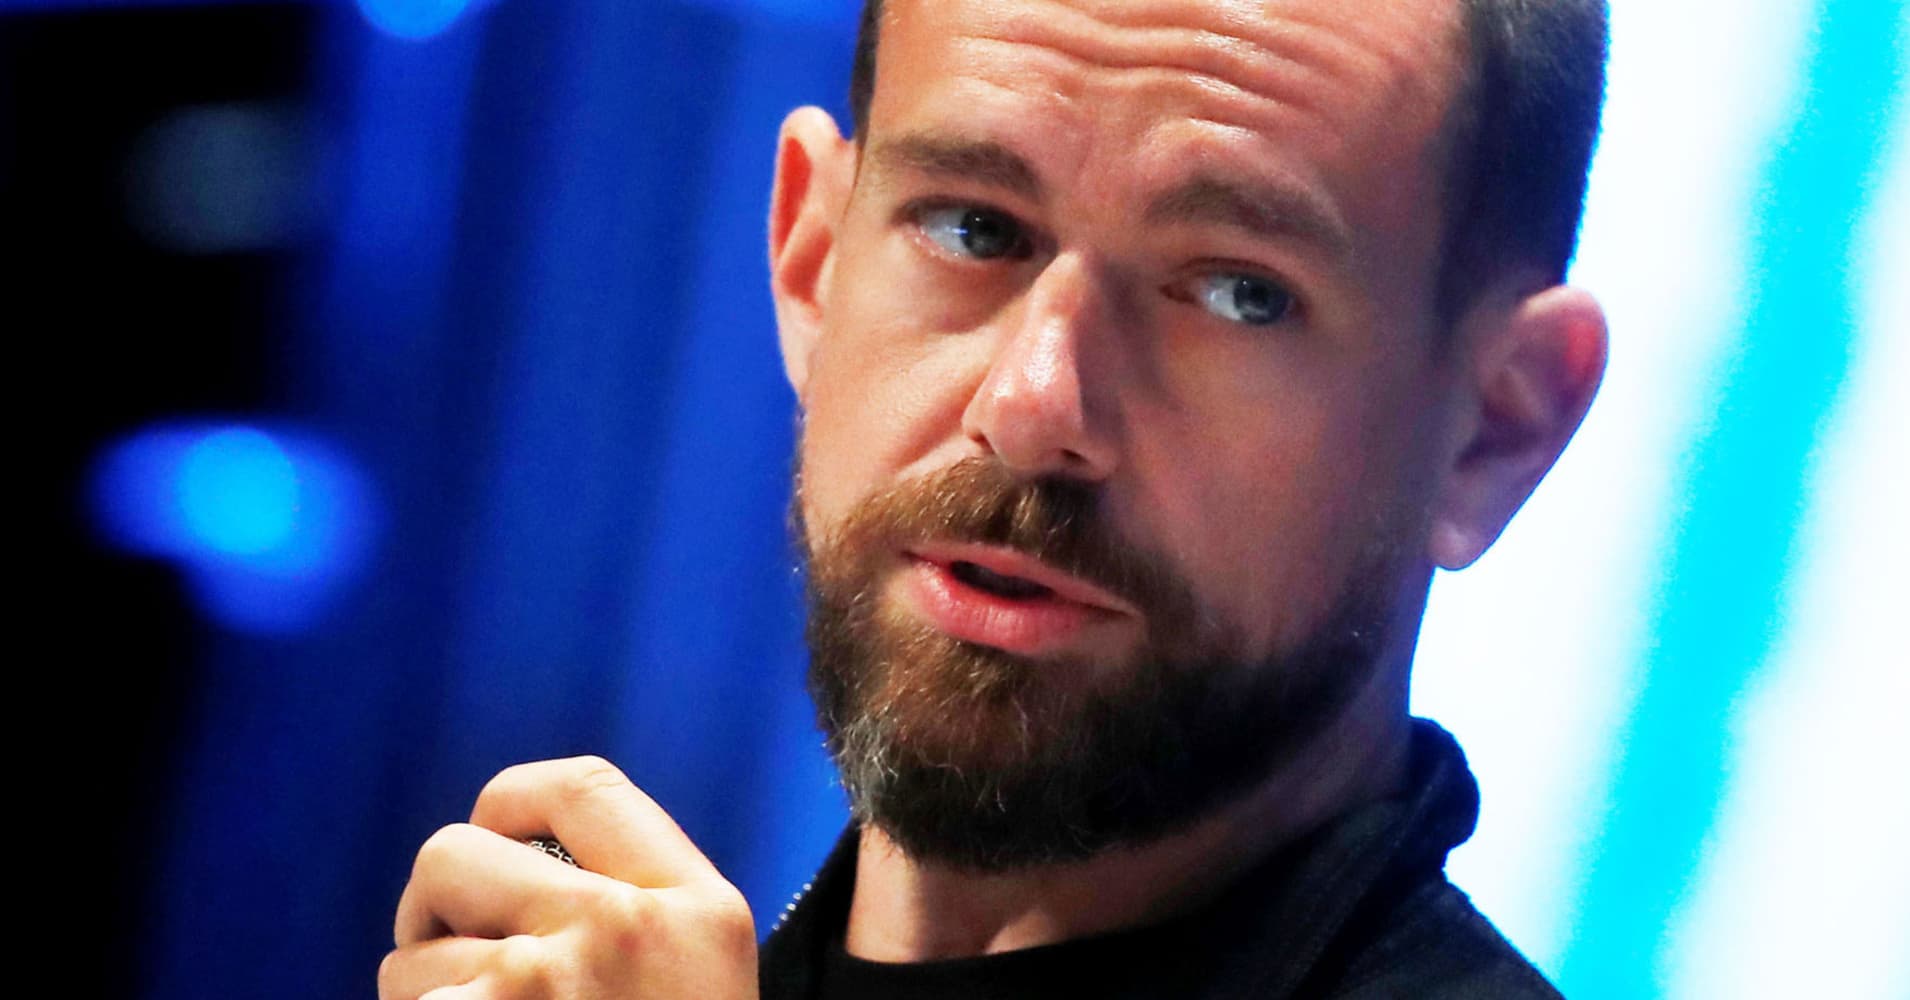 Twitter is cleaning up its platform, and the stock is tanking